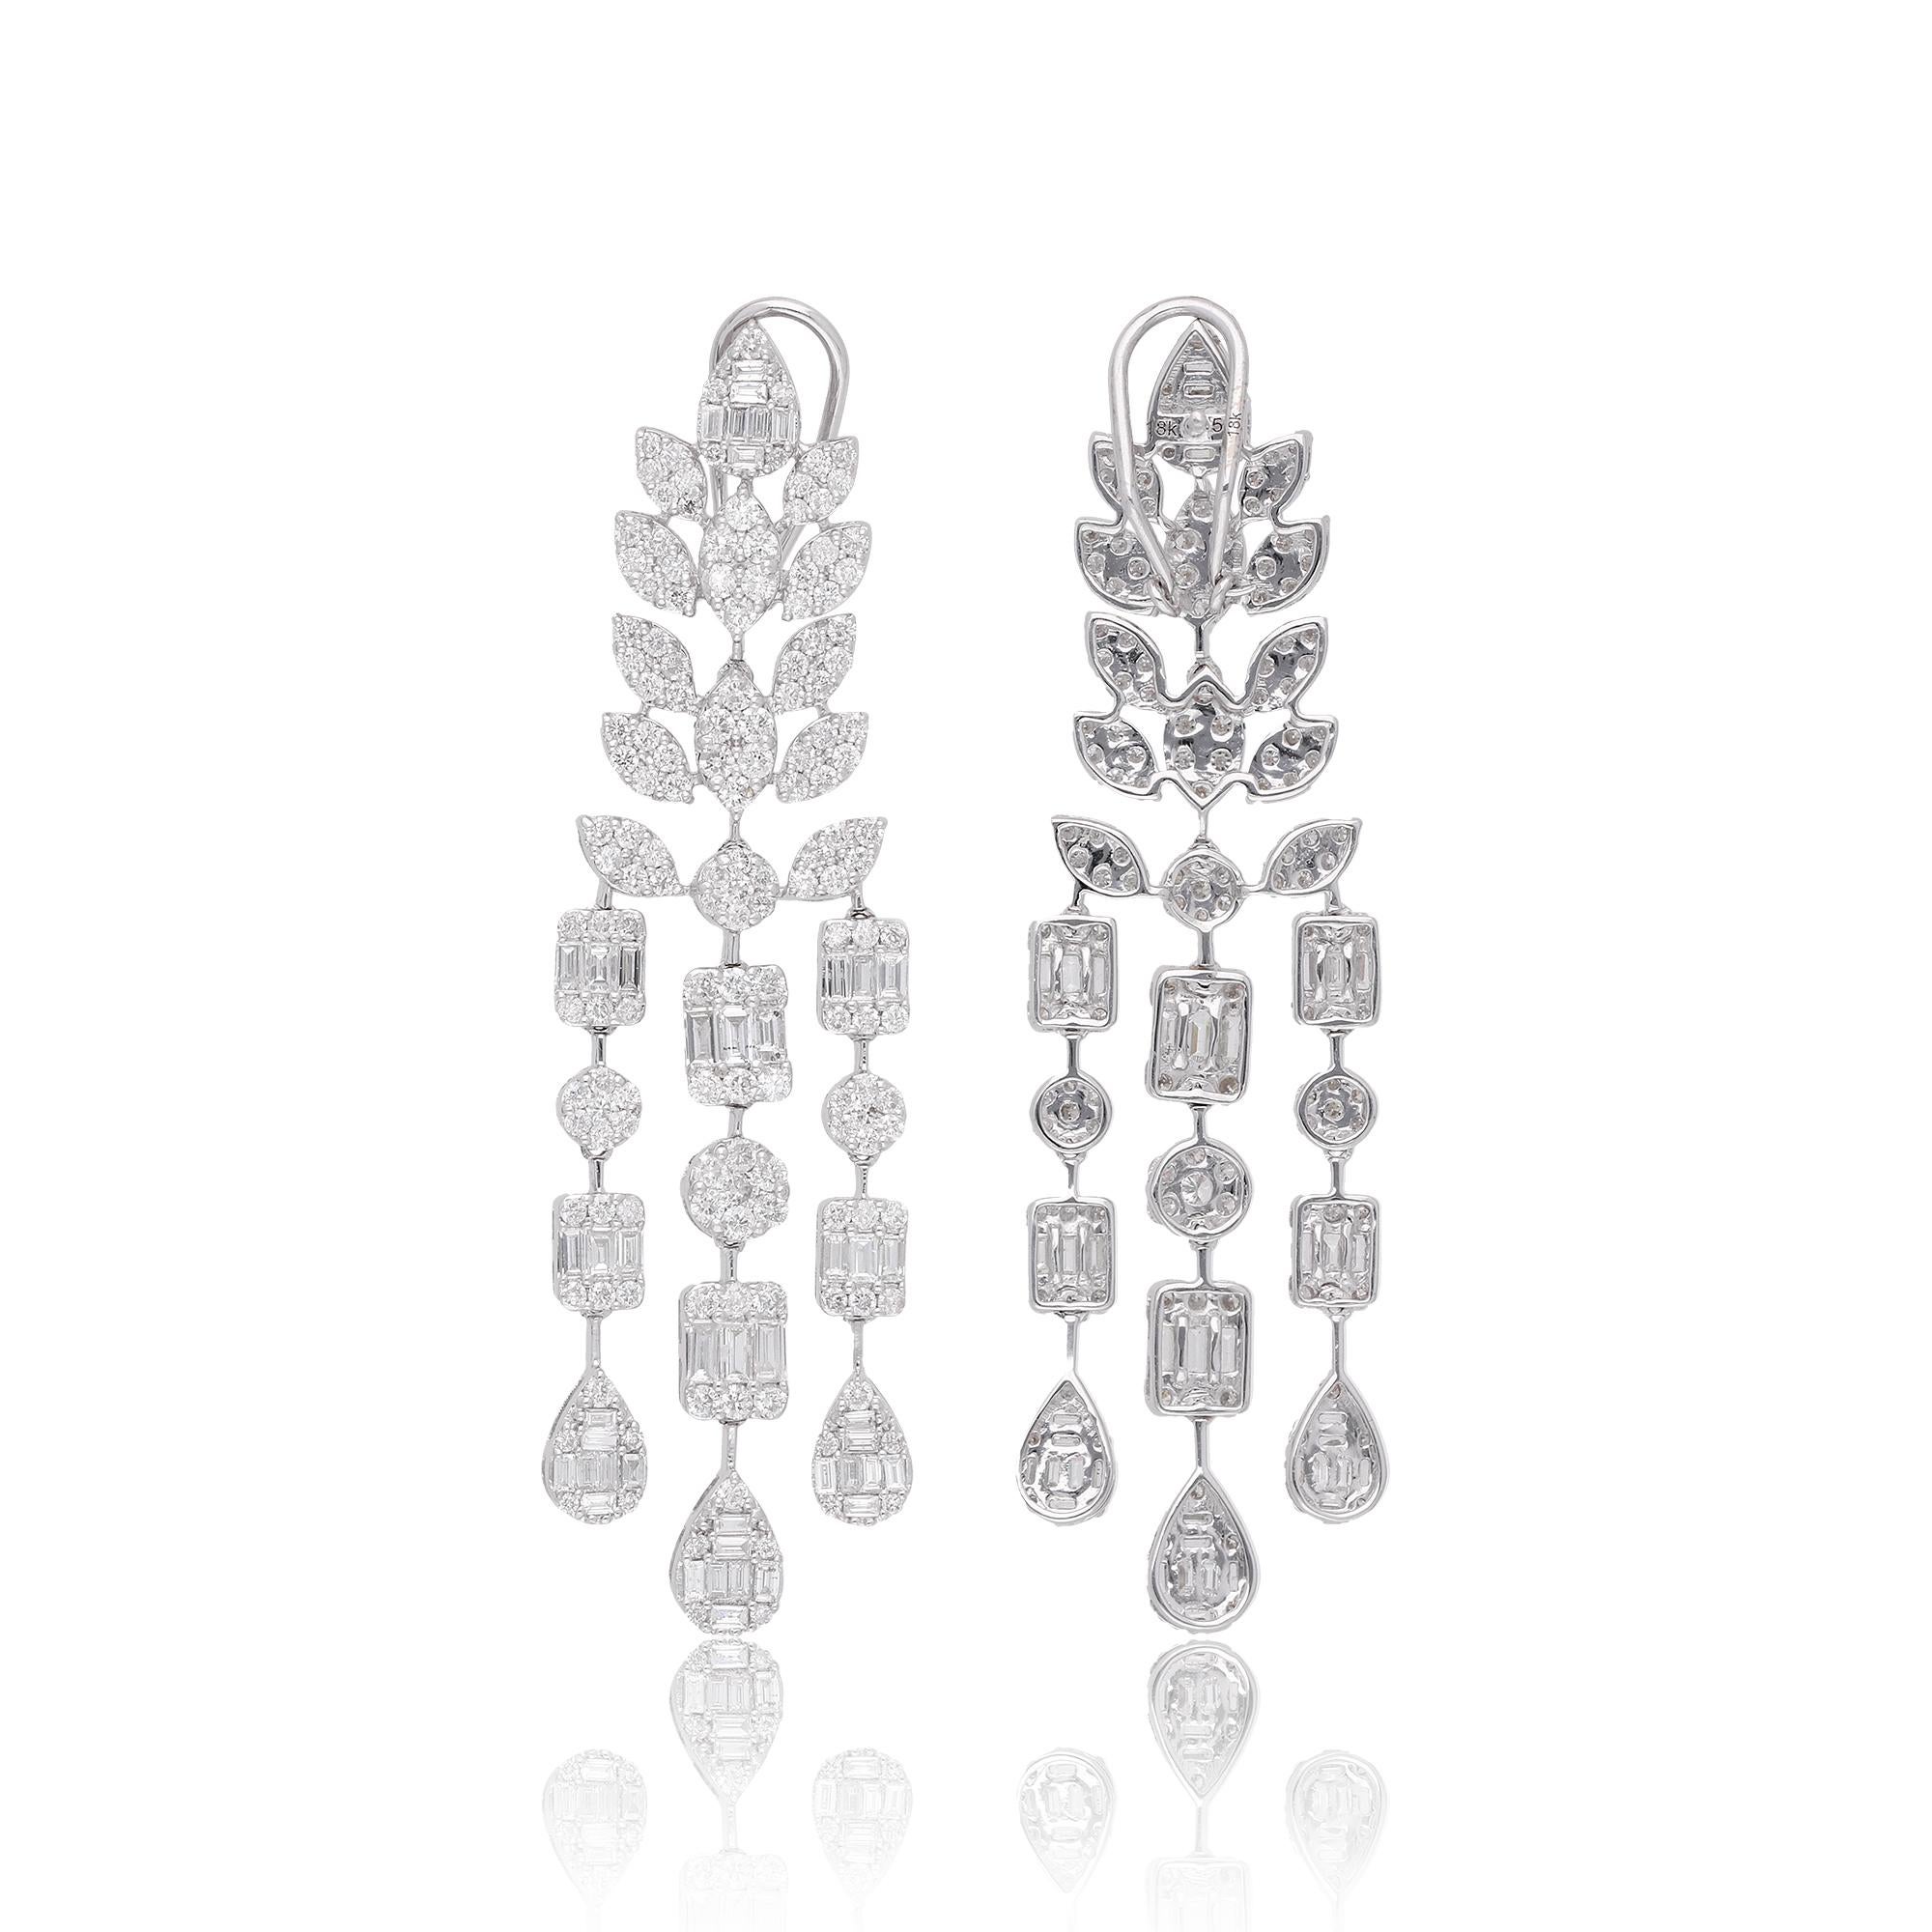 Make your special day even more magical with these exquisite Chandelier Diamond Earrings, handcrafted with love. These earrings feature an elegant Chandelier design that will take your bridal look to the next level. These earrings are available in